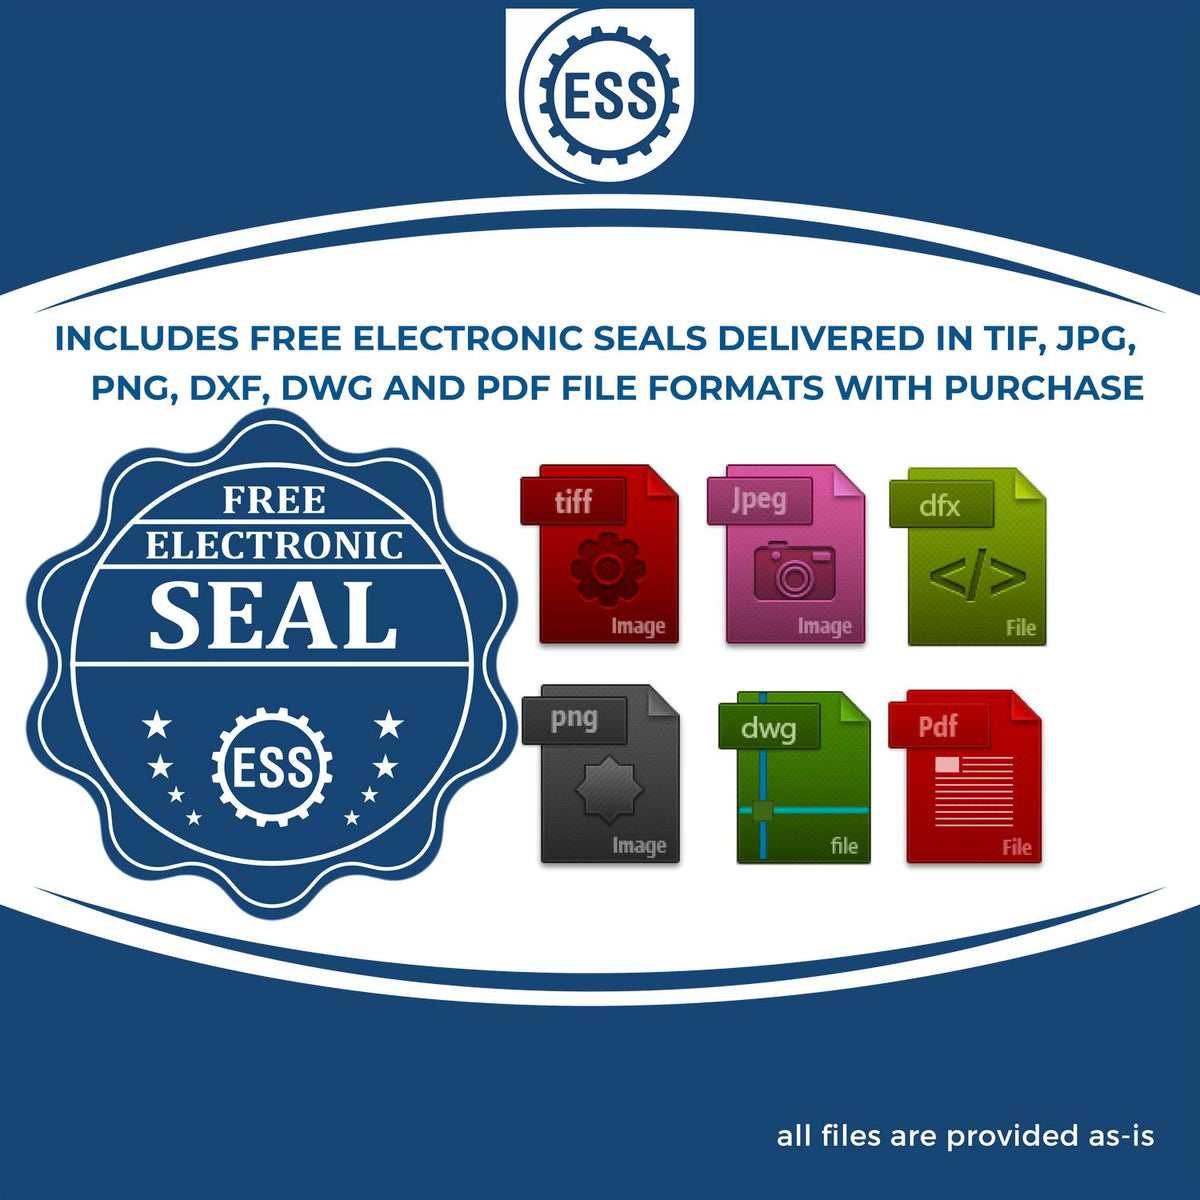 An infographic for the free electronic seal for the Hybrid Hawaii Engineer Seal illustrating the different file type icons such as DXF, DWG, TIF, JPG and PNG.